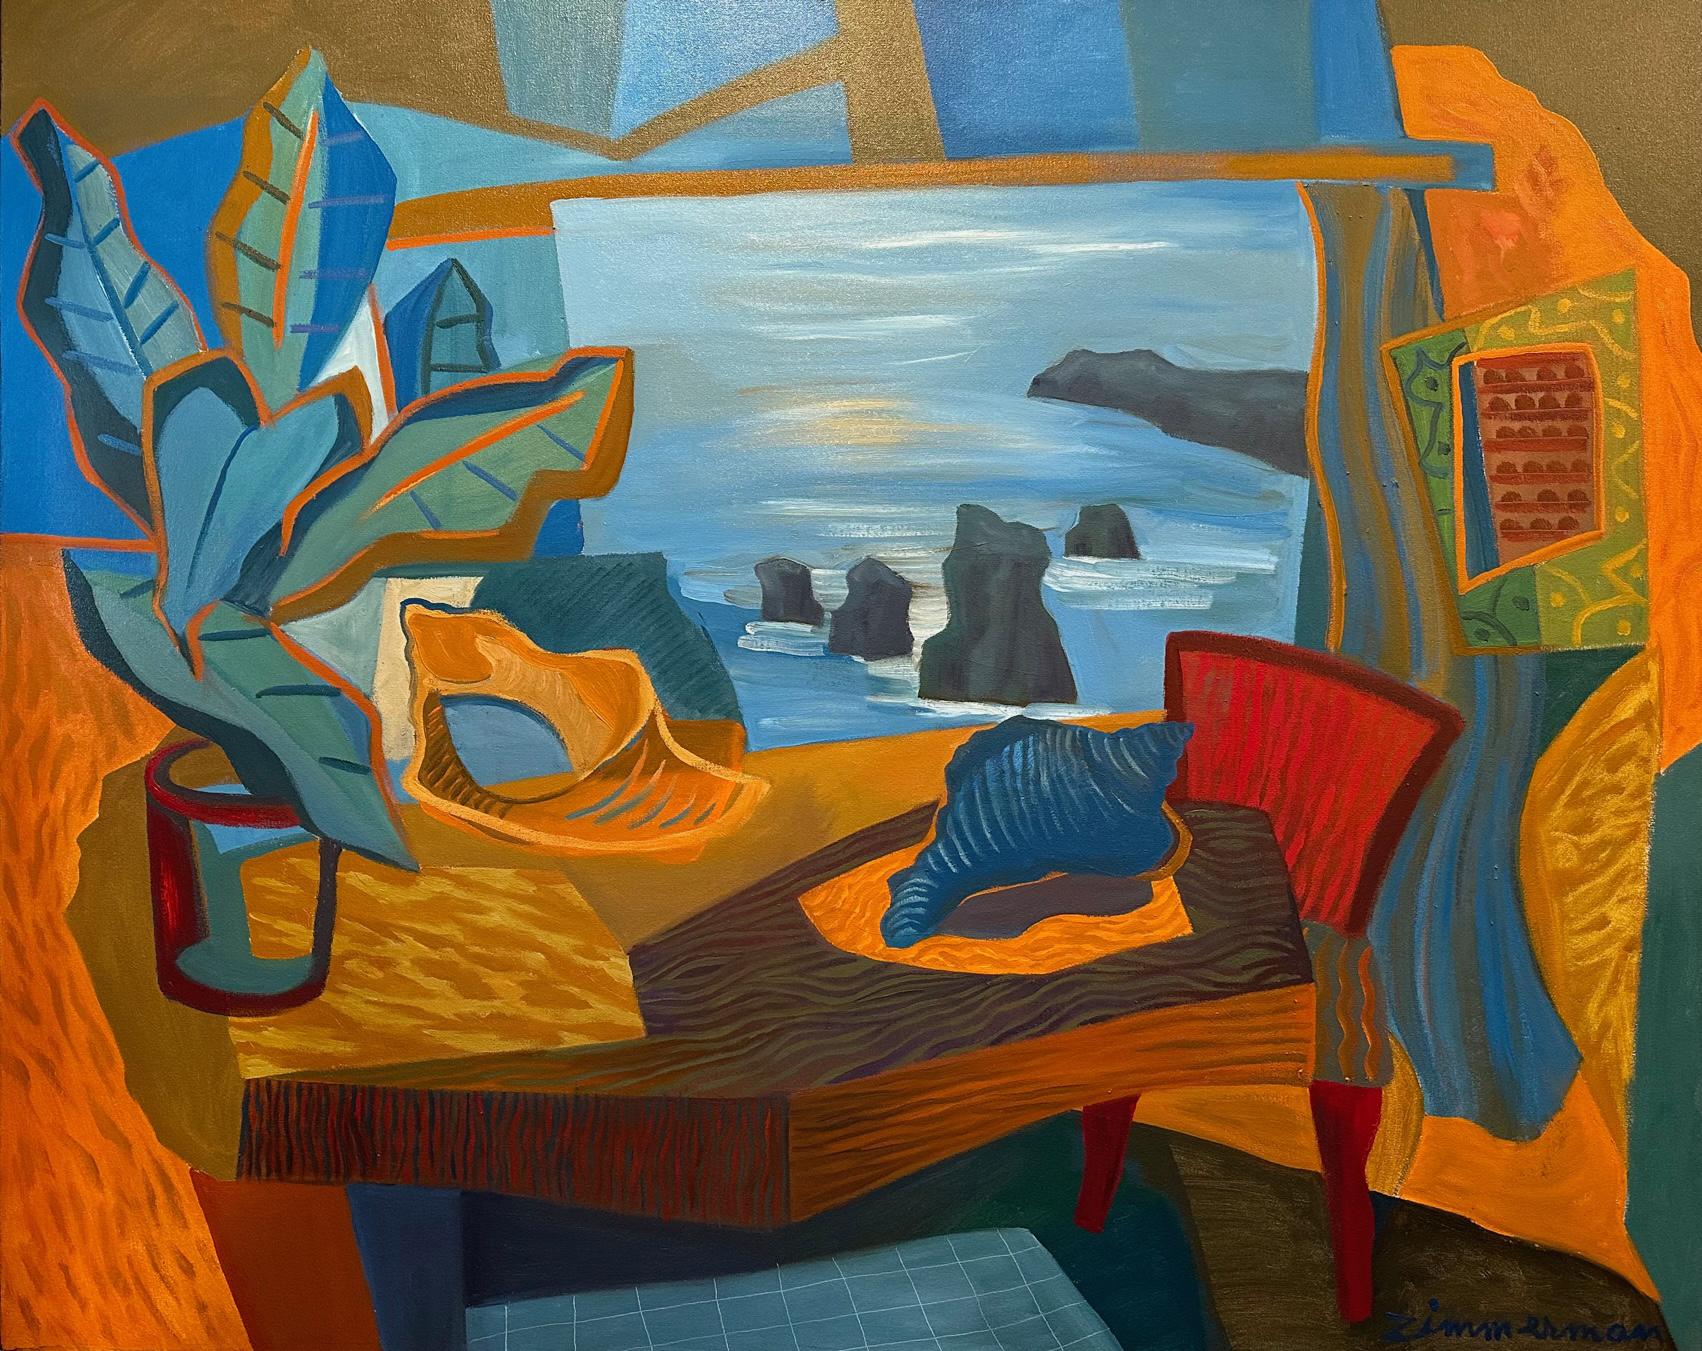 'View Through To The Sea', oil on canvas, is exhibited in the Zimmerman Gallery, Carmel, CA


Marc Zimmerman creates playful paintings, whether deep mysterious jungle or delightfully whimsical florals. His color palette explores various harmonies